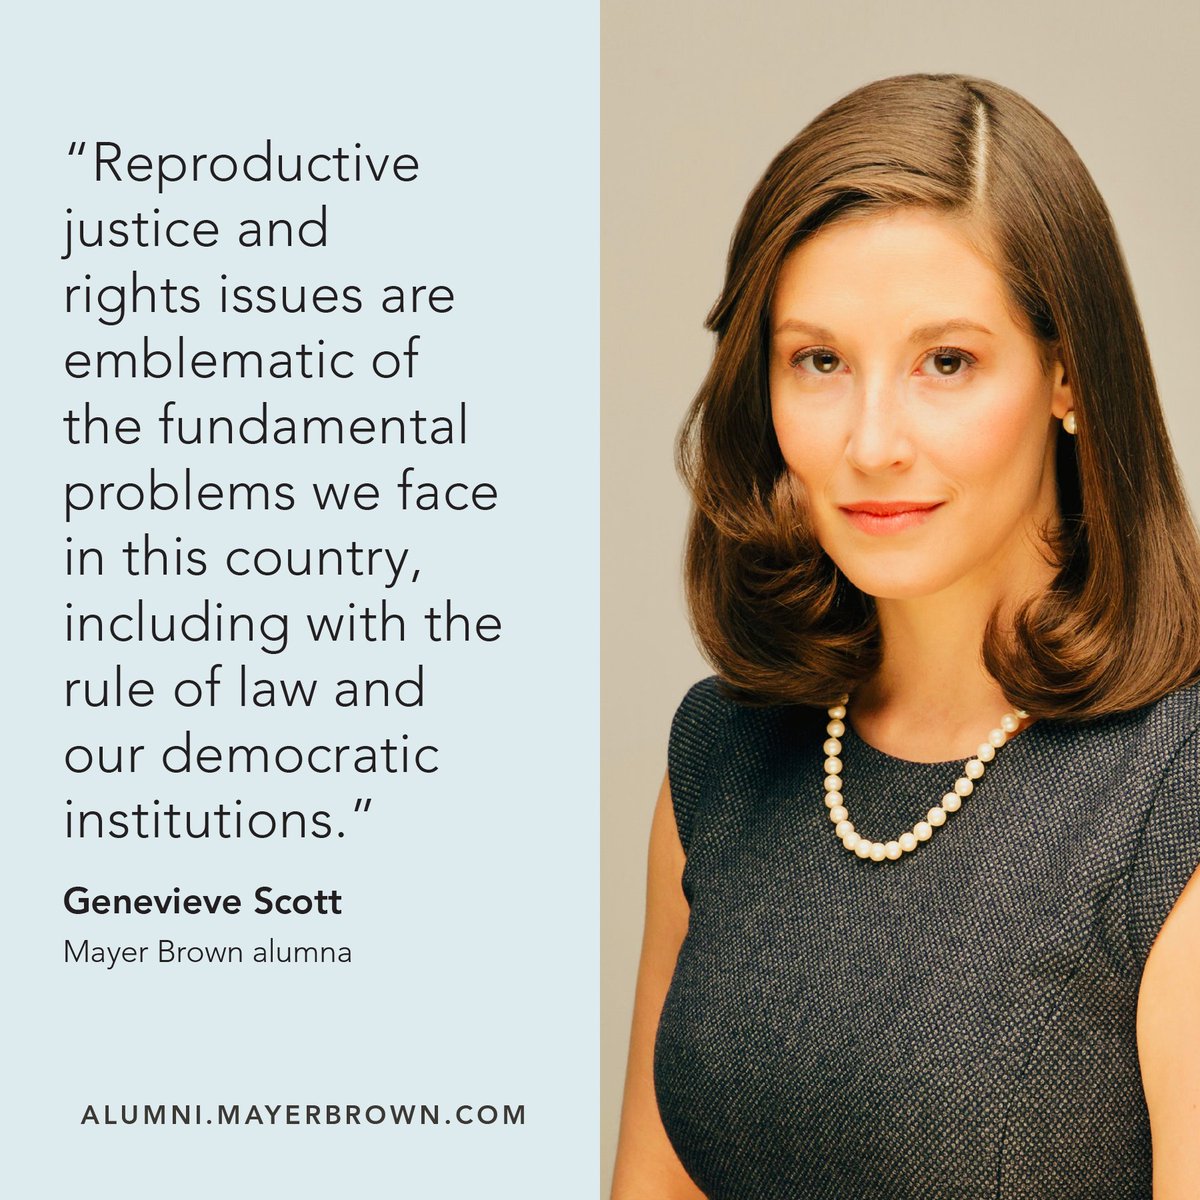 We recently spoke with Mayer Brown alumna Genevieve Scott to find out how she is addressing the relationship between democracy and reproductive justice while teaching the next generation of lawyers and decision-makers. bit.ly/3PWTCII #MayerBrownAlumni